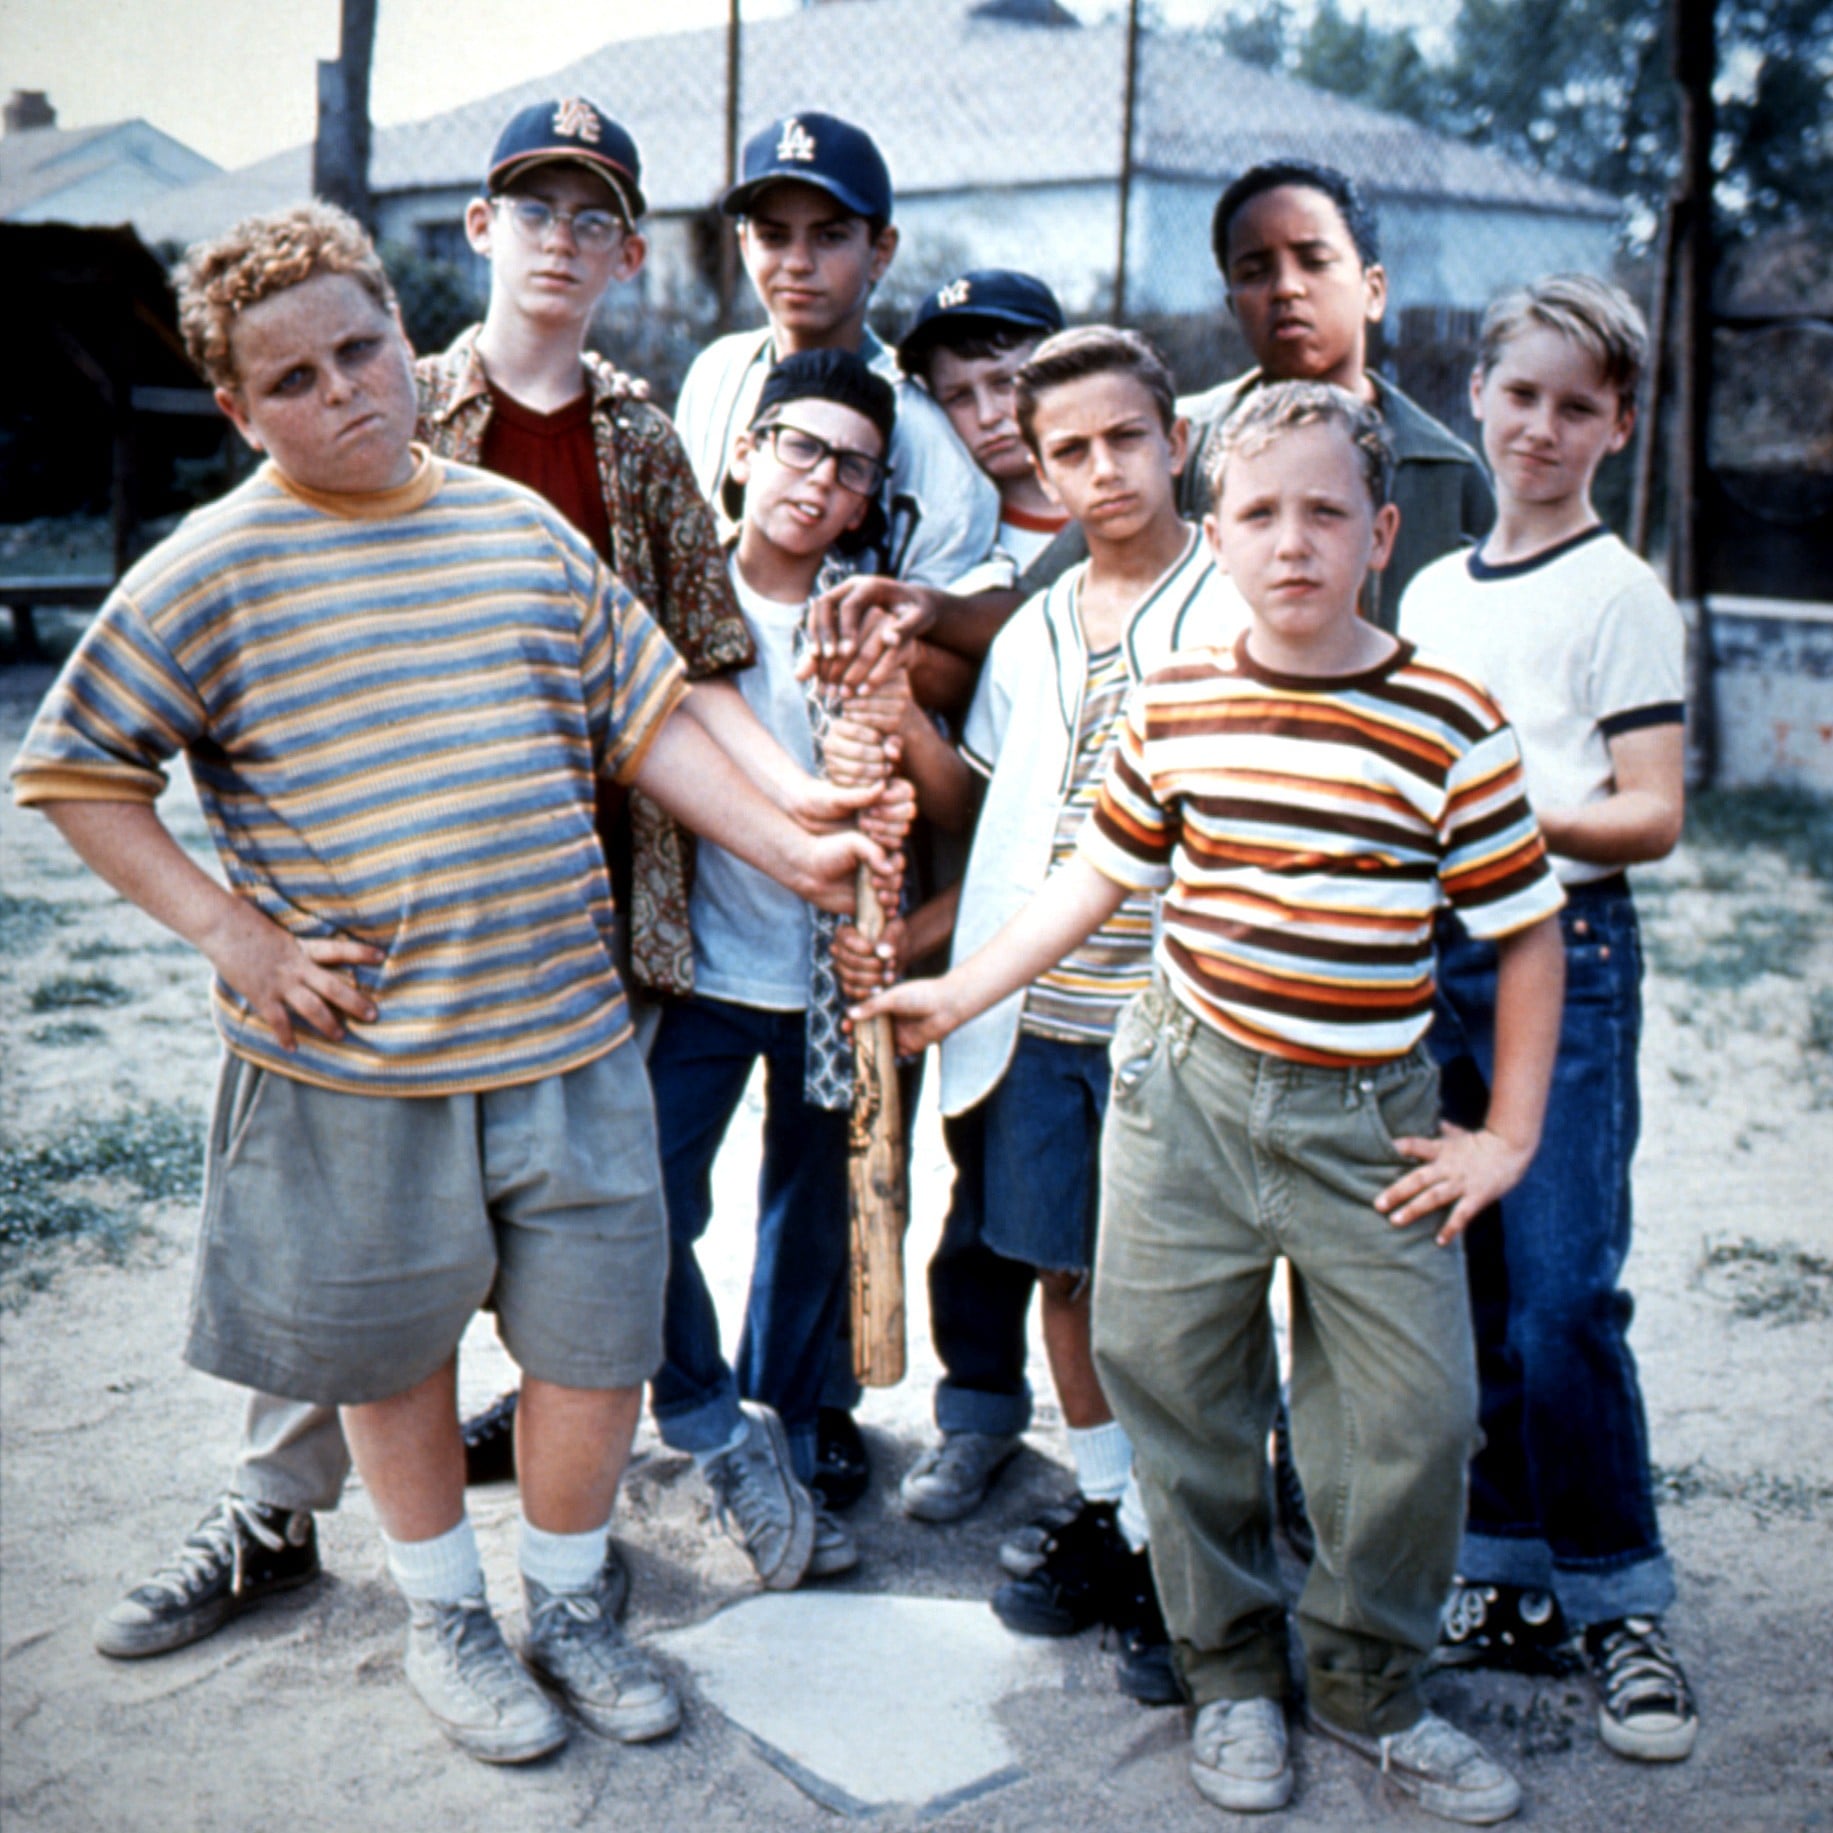 You're Killin' Me, Smalls!' And Other Iconic Sandlot Quotes To